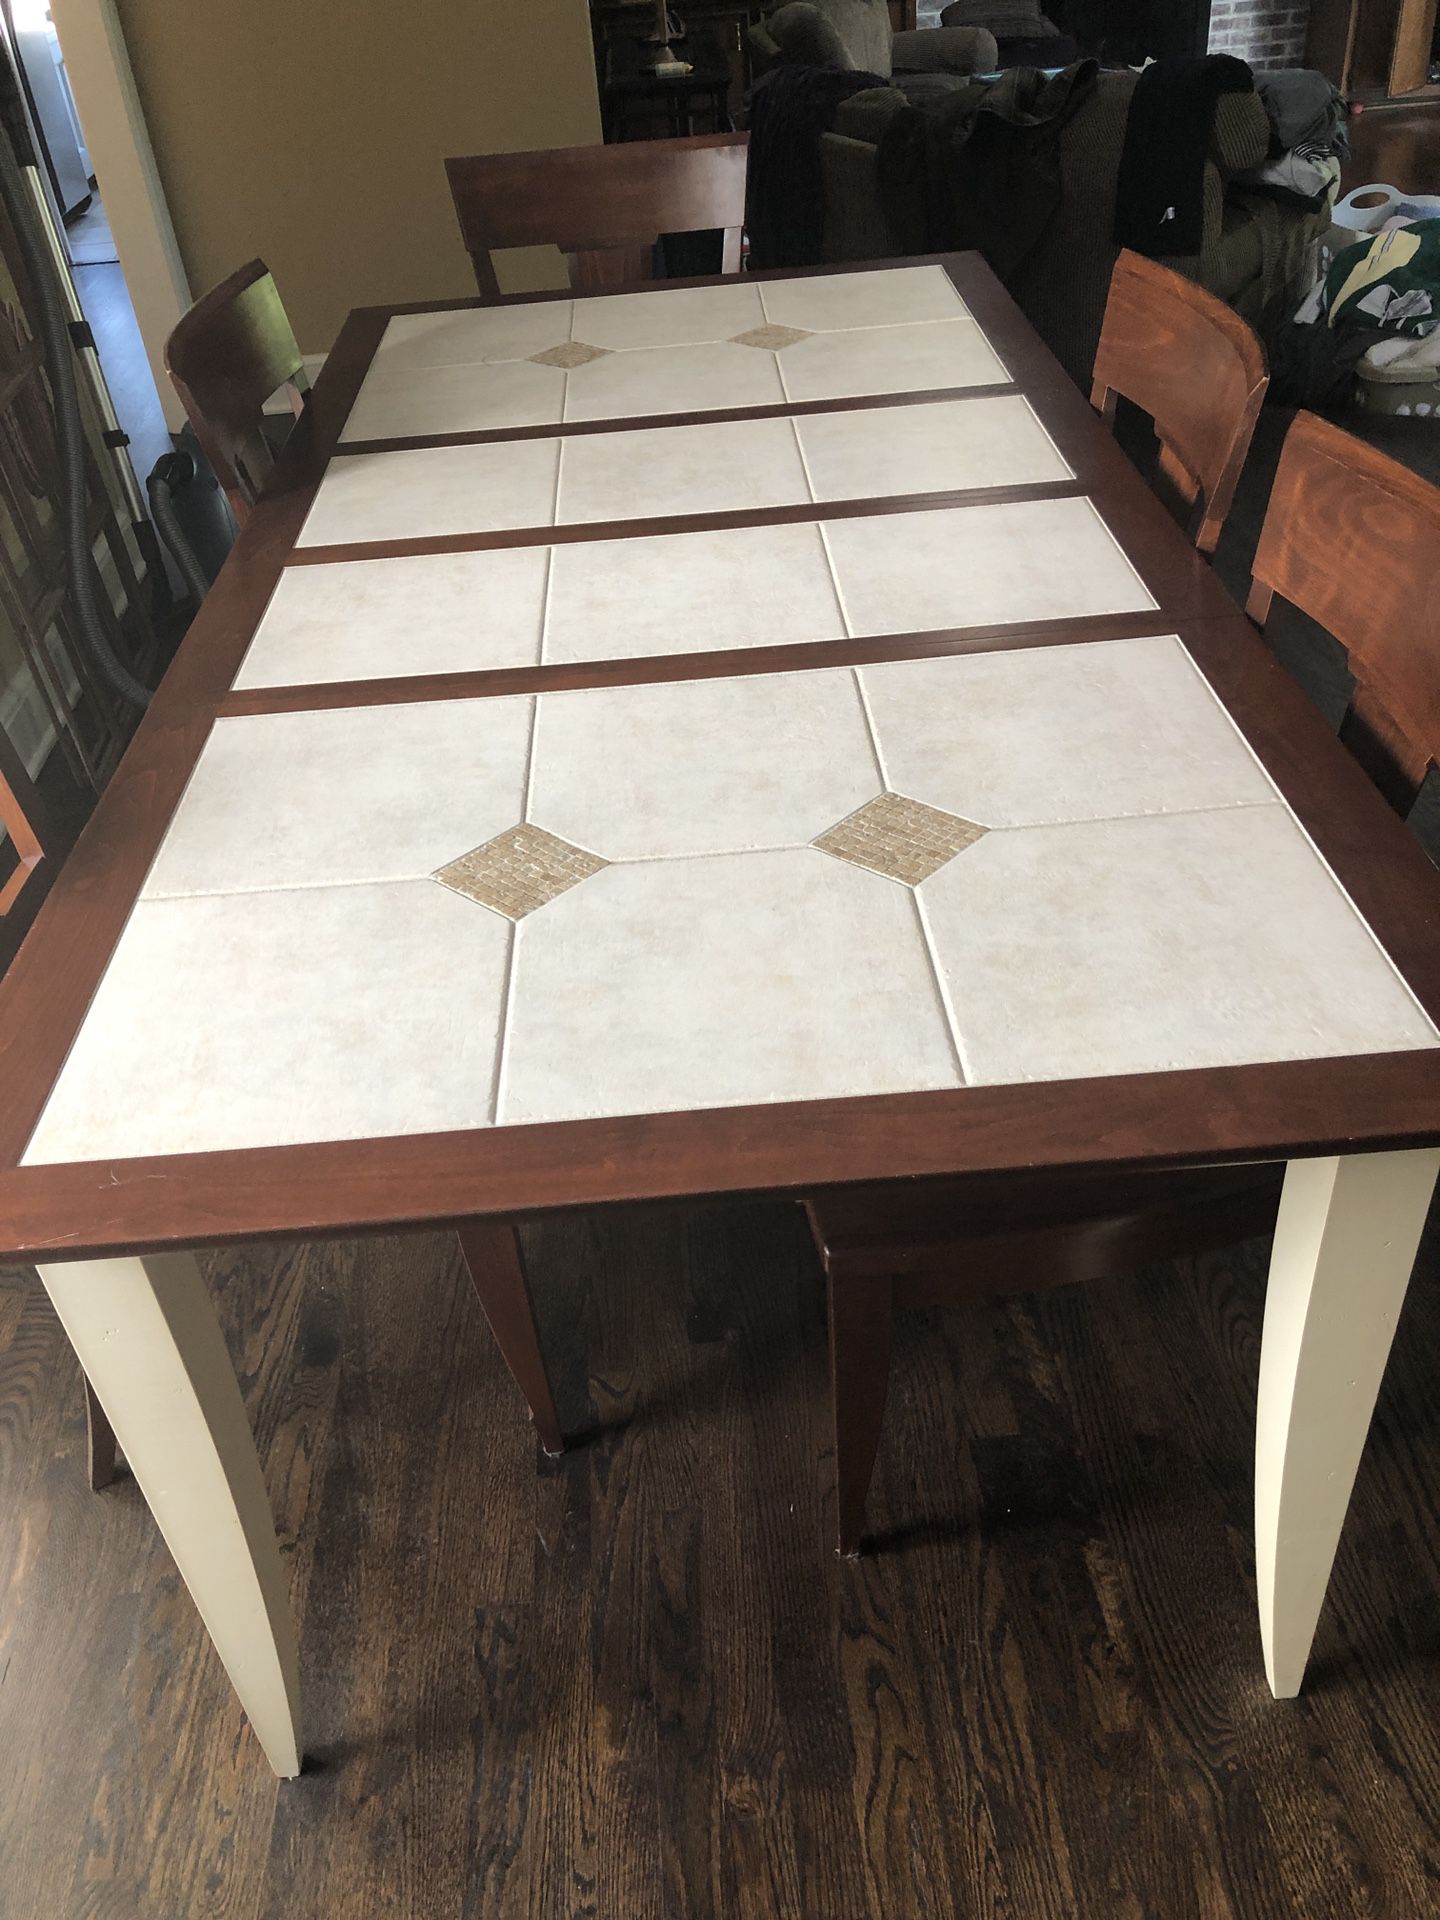 Nichols & Stone Solid Wood and Tile Dining Table with Buffet Hutch and 6 chairs